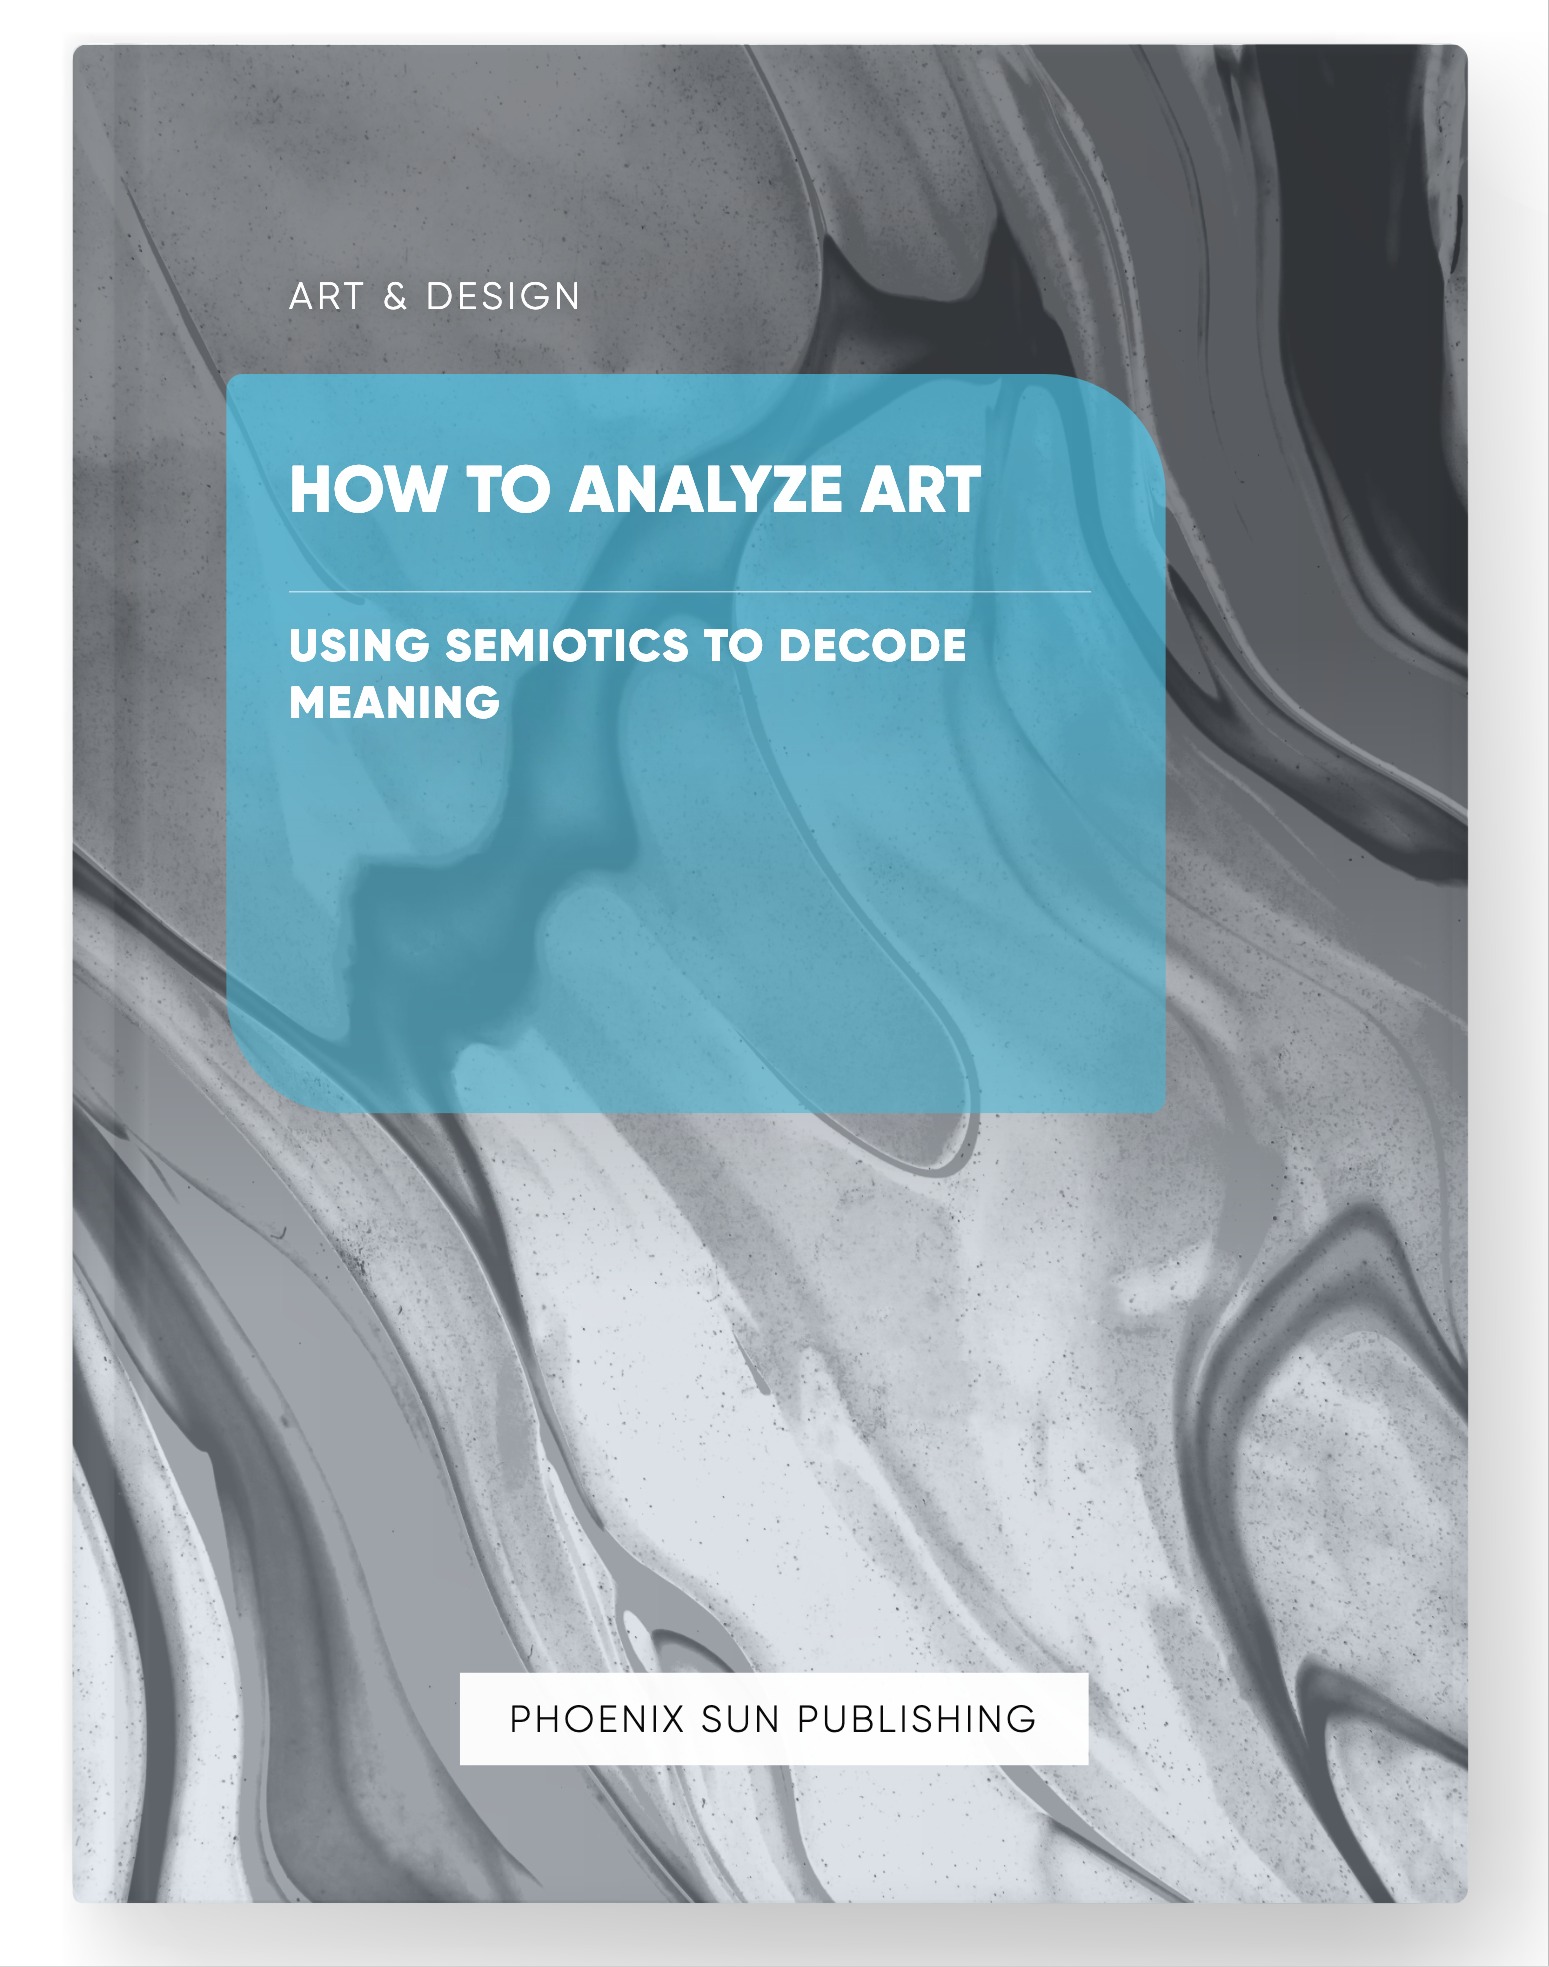 How to Analyze Art – Using Semiotics to Decode Meaning